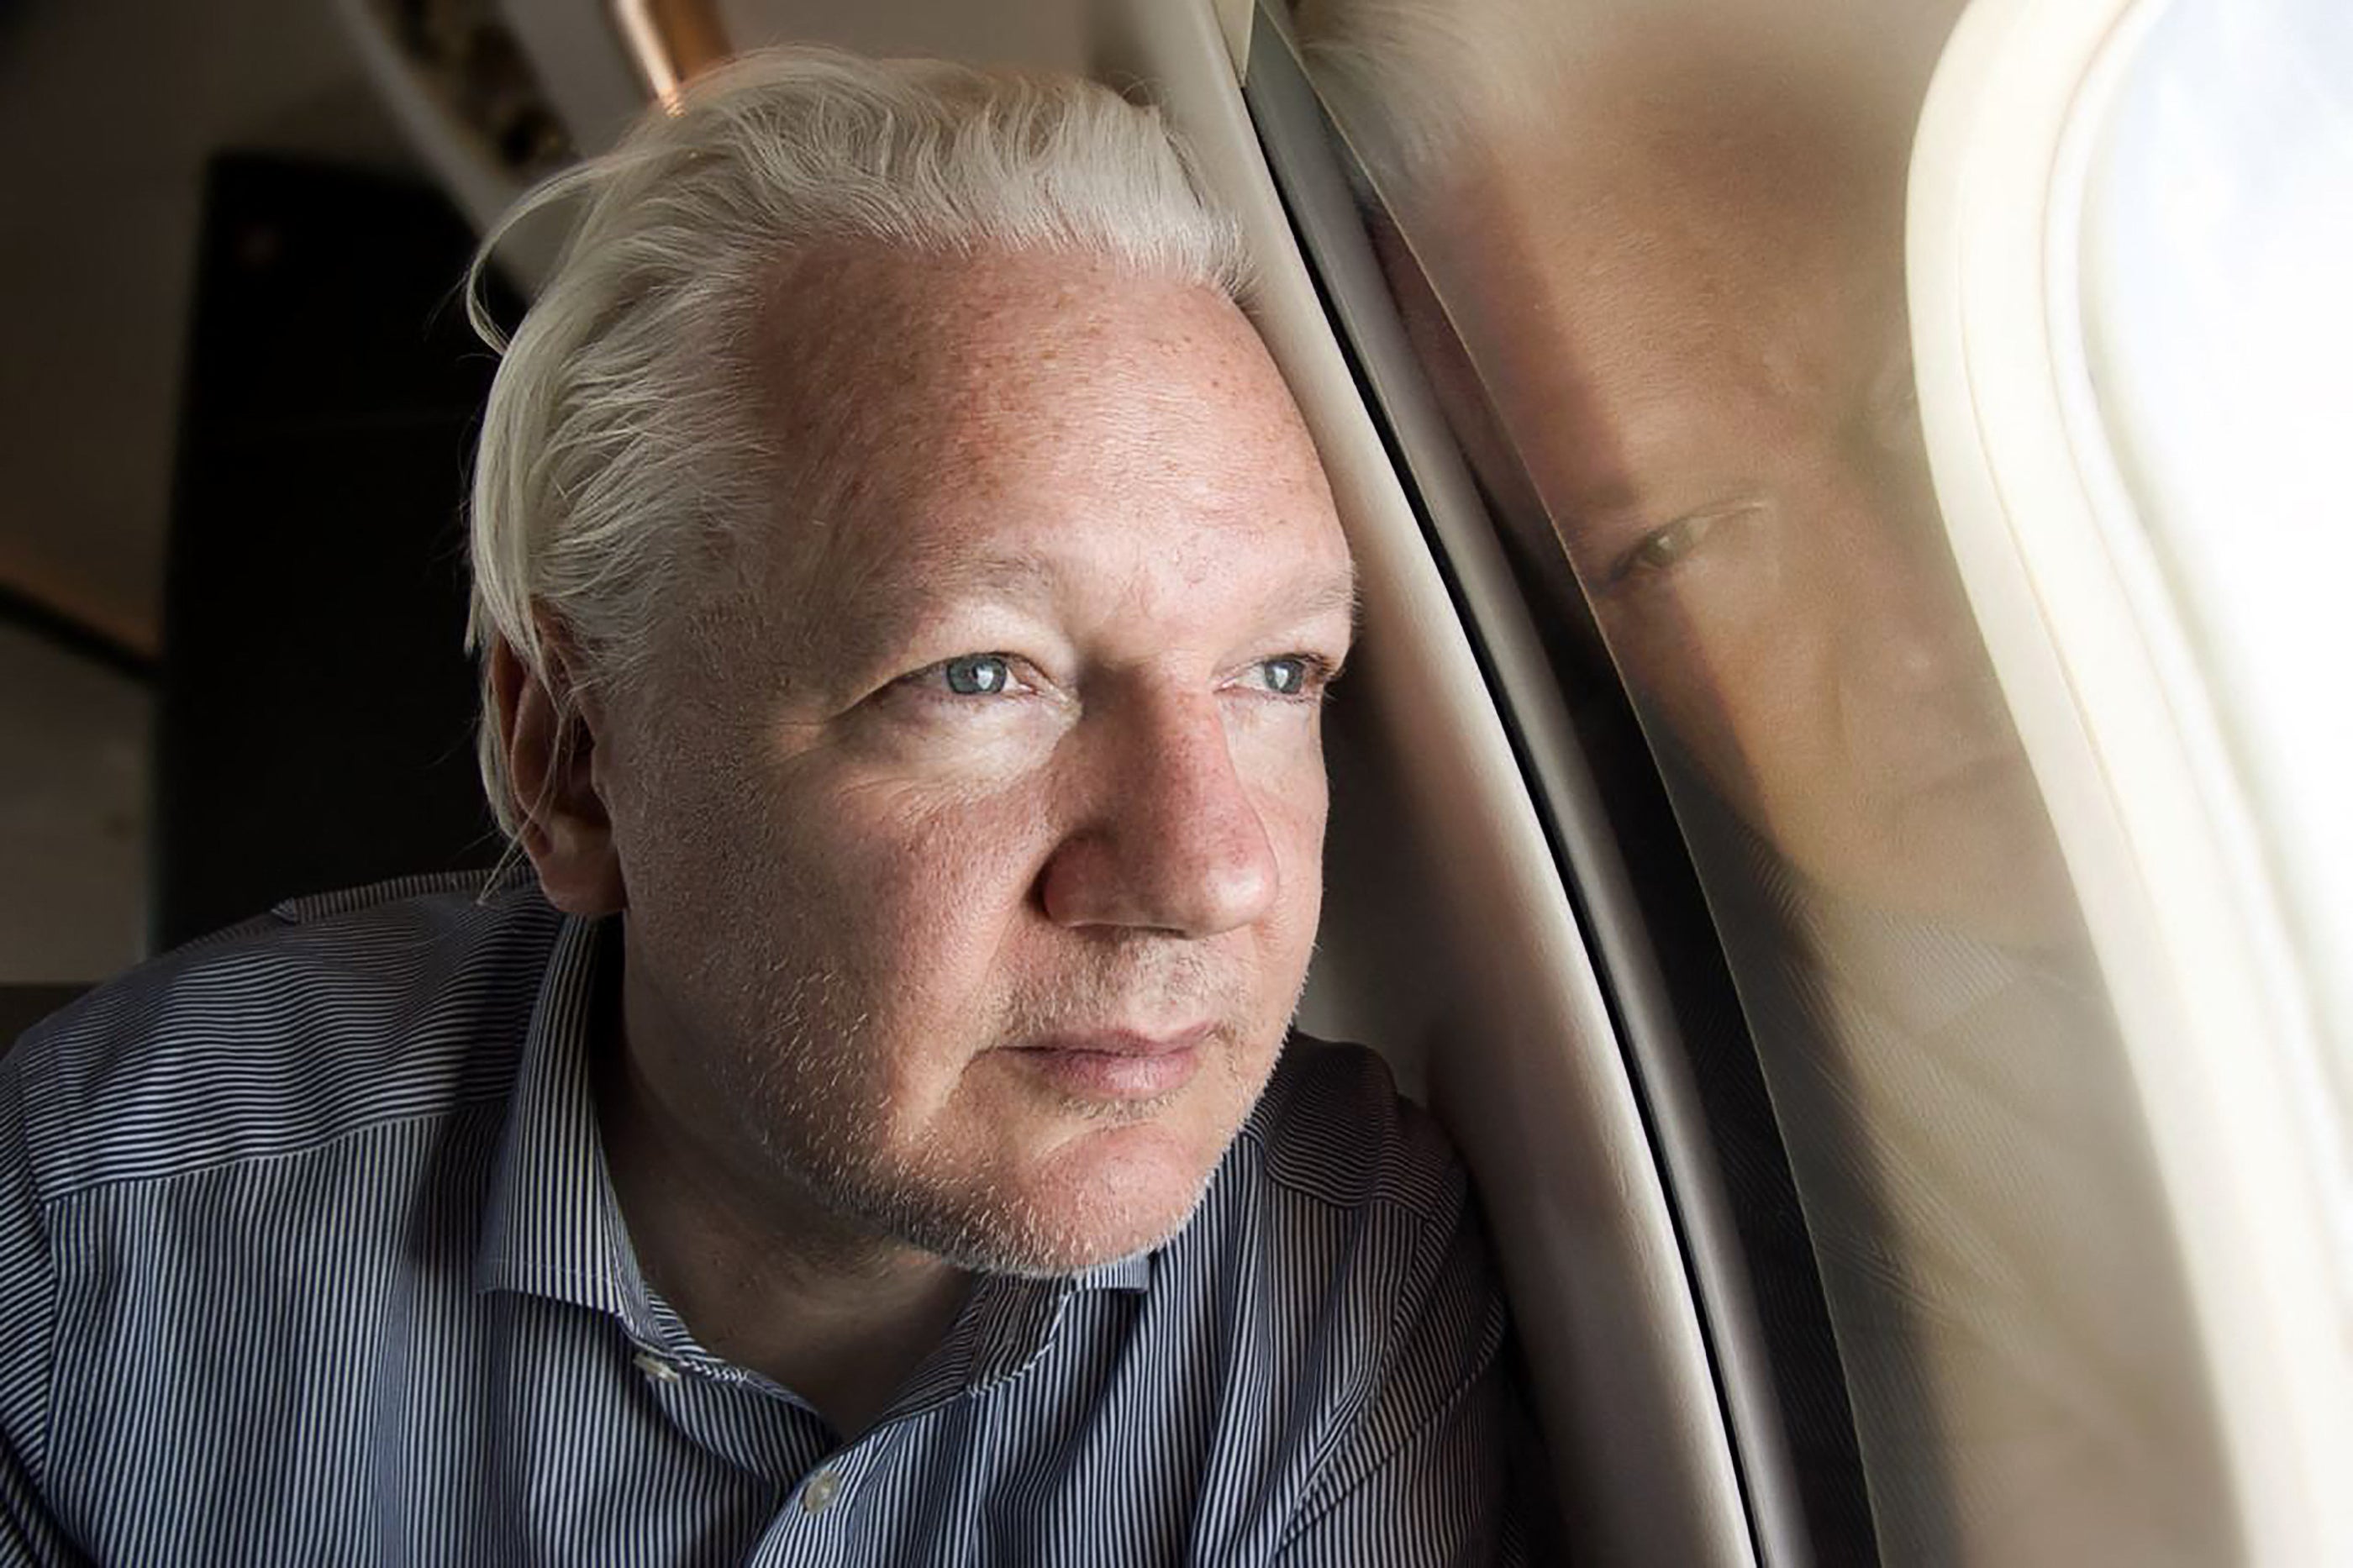 WikiLeaks founder Julian Assange looks out of the window as his plane from London approaches Bangkok airport